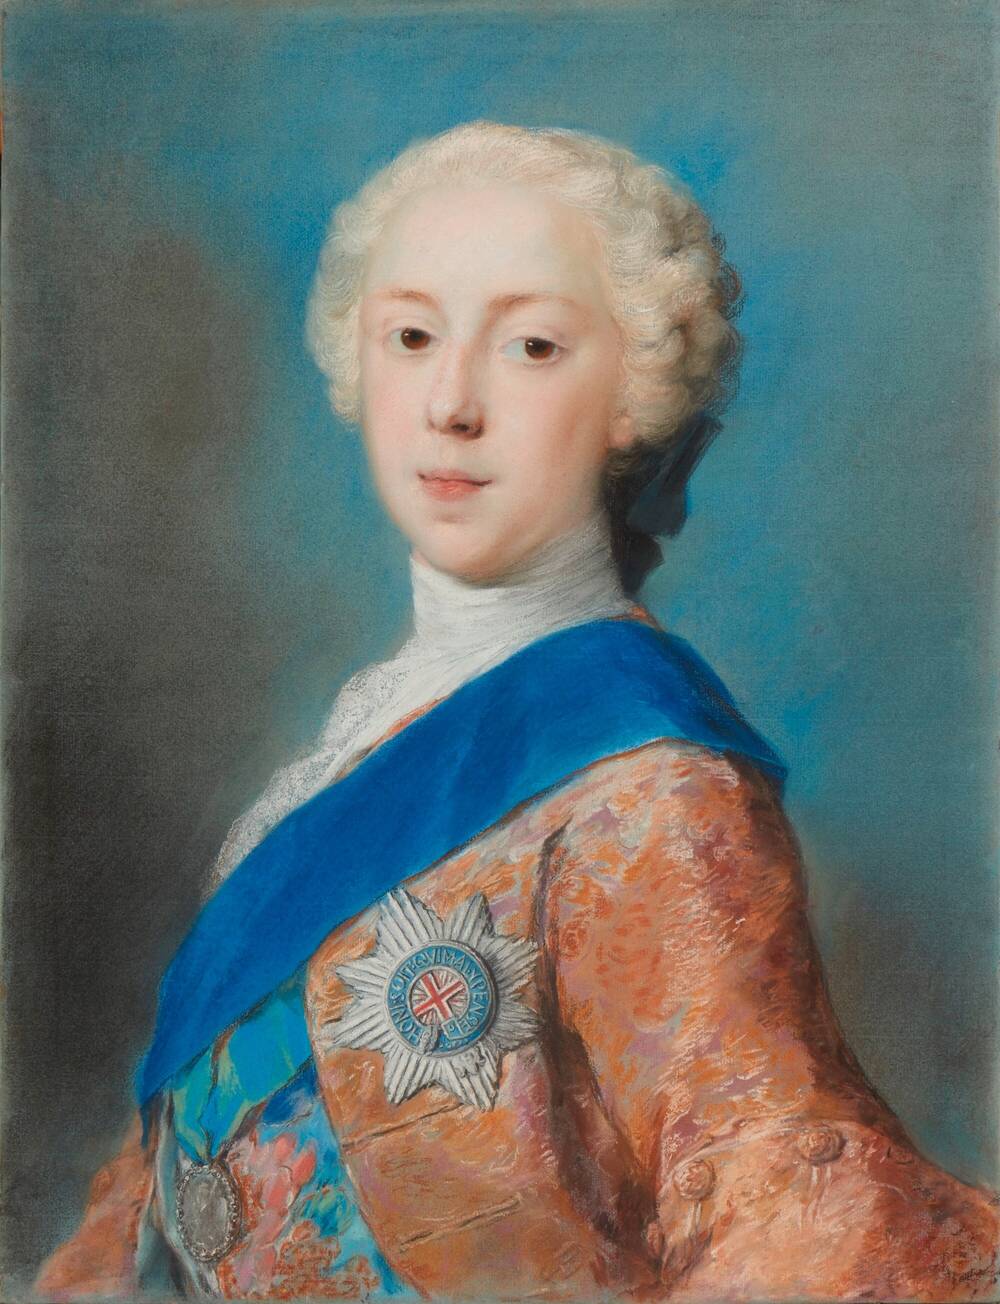 Portrait of Prince Charles Edward Stuart as a young man, with a blue sash over his clothes.